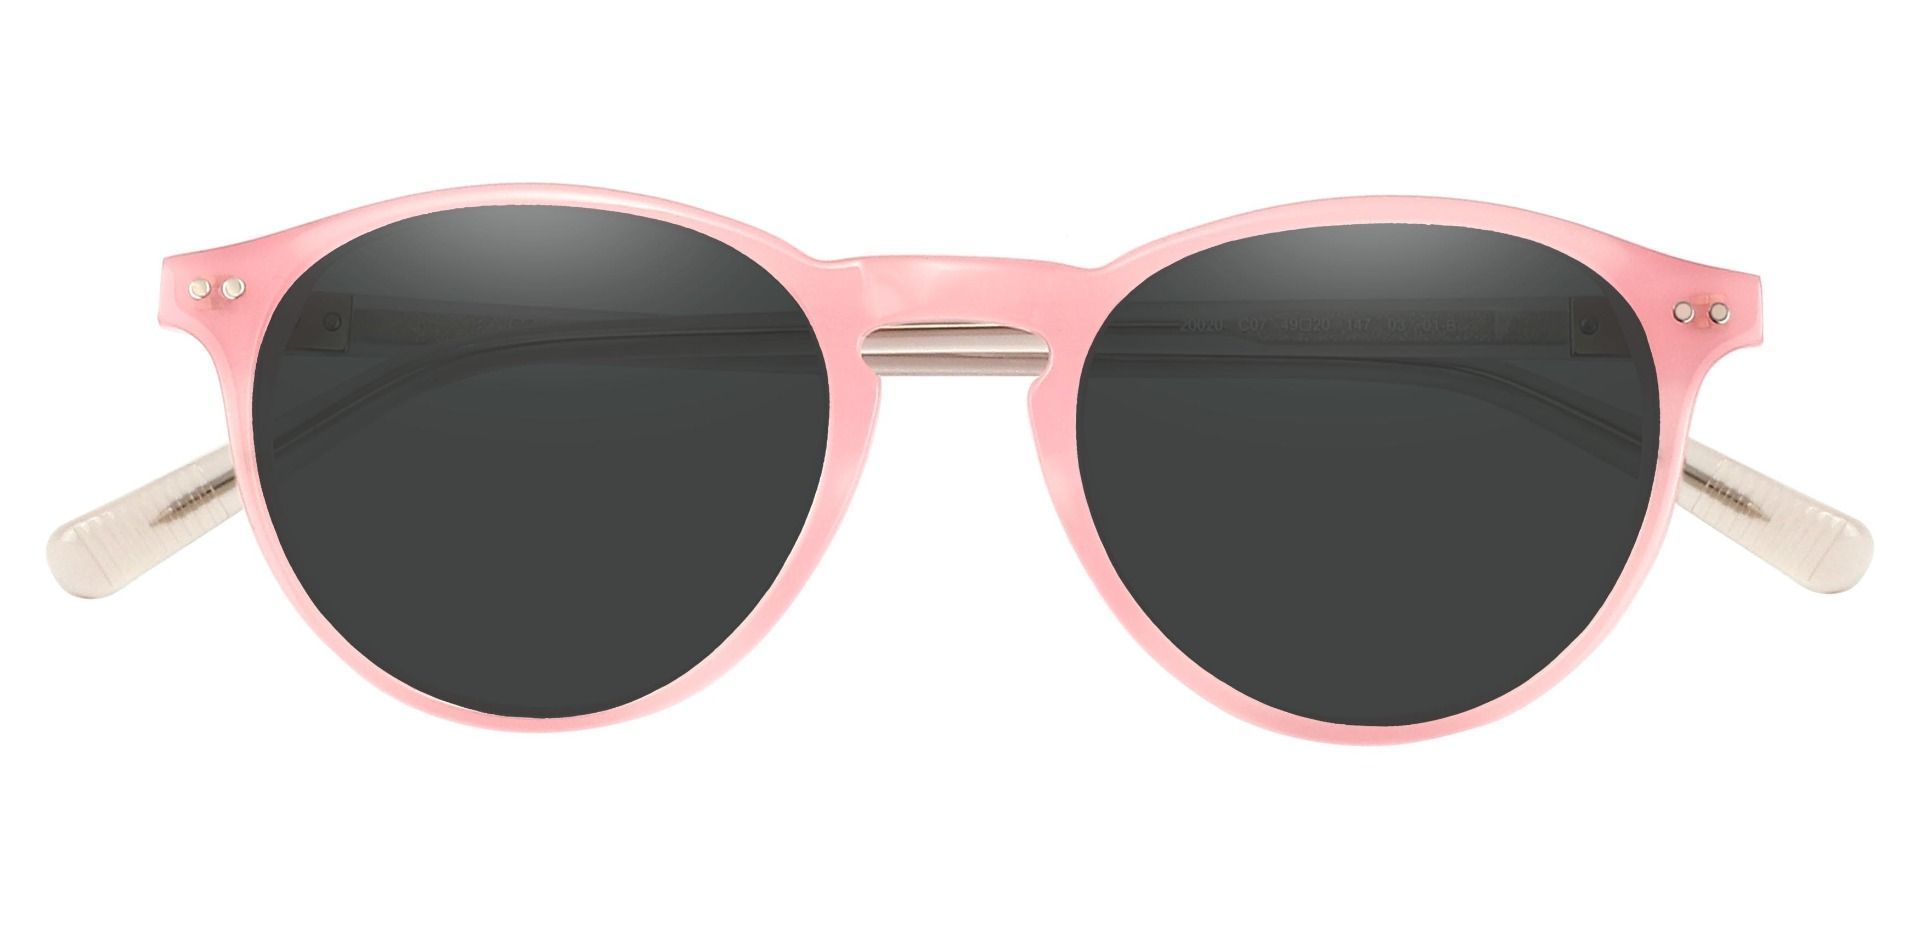 Monarch Oval Prescription Sunglasses - Pink Frame With Gray Lenses